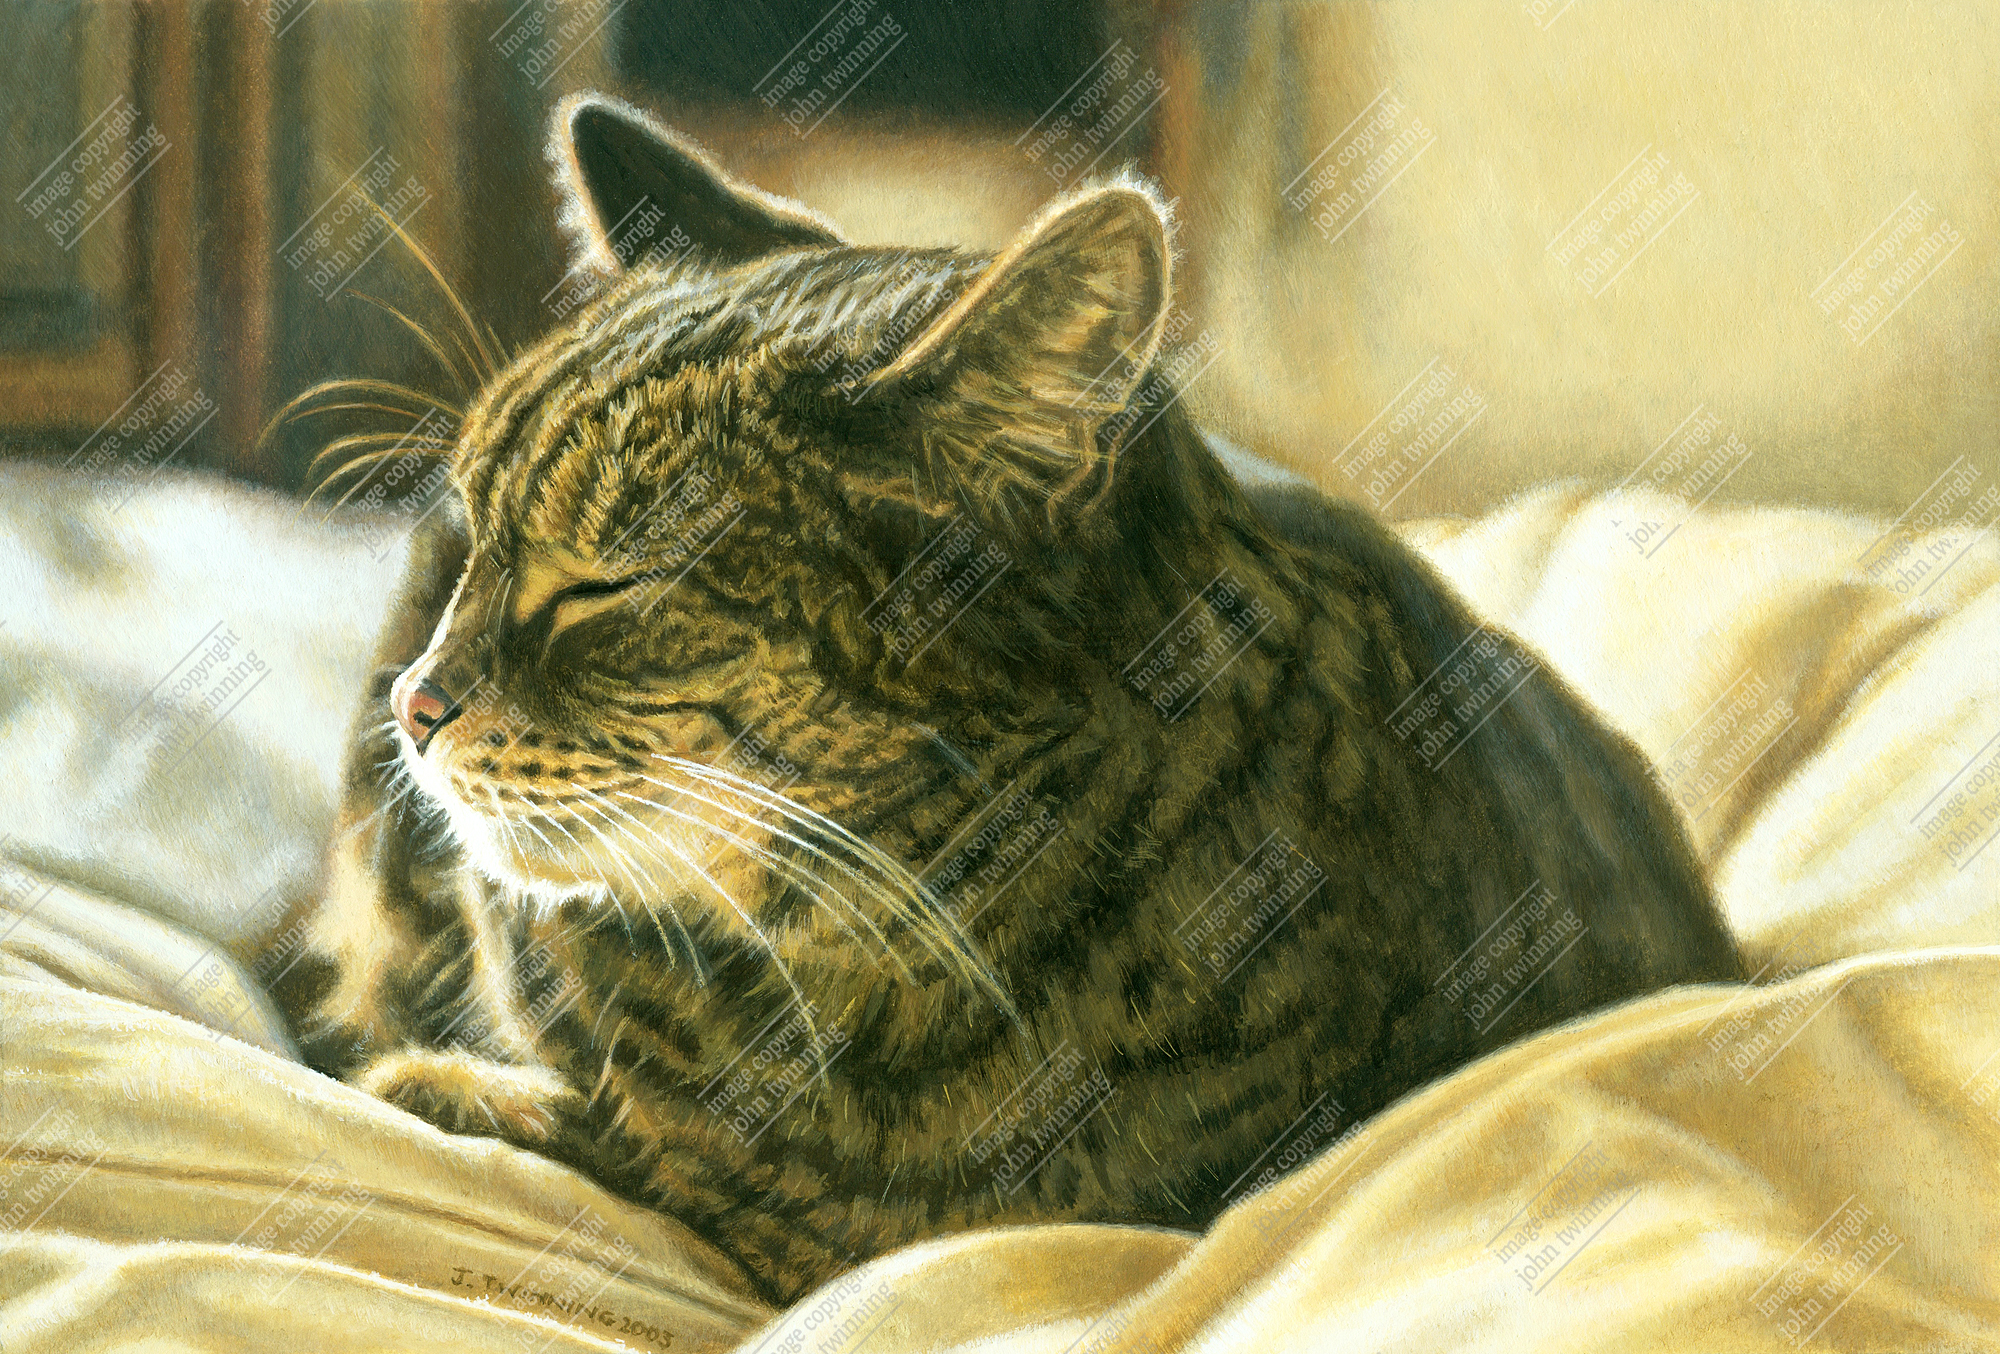 ‘Tabatha Study II’ – art print from a pet portrait watercolour painting of a tabby cat